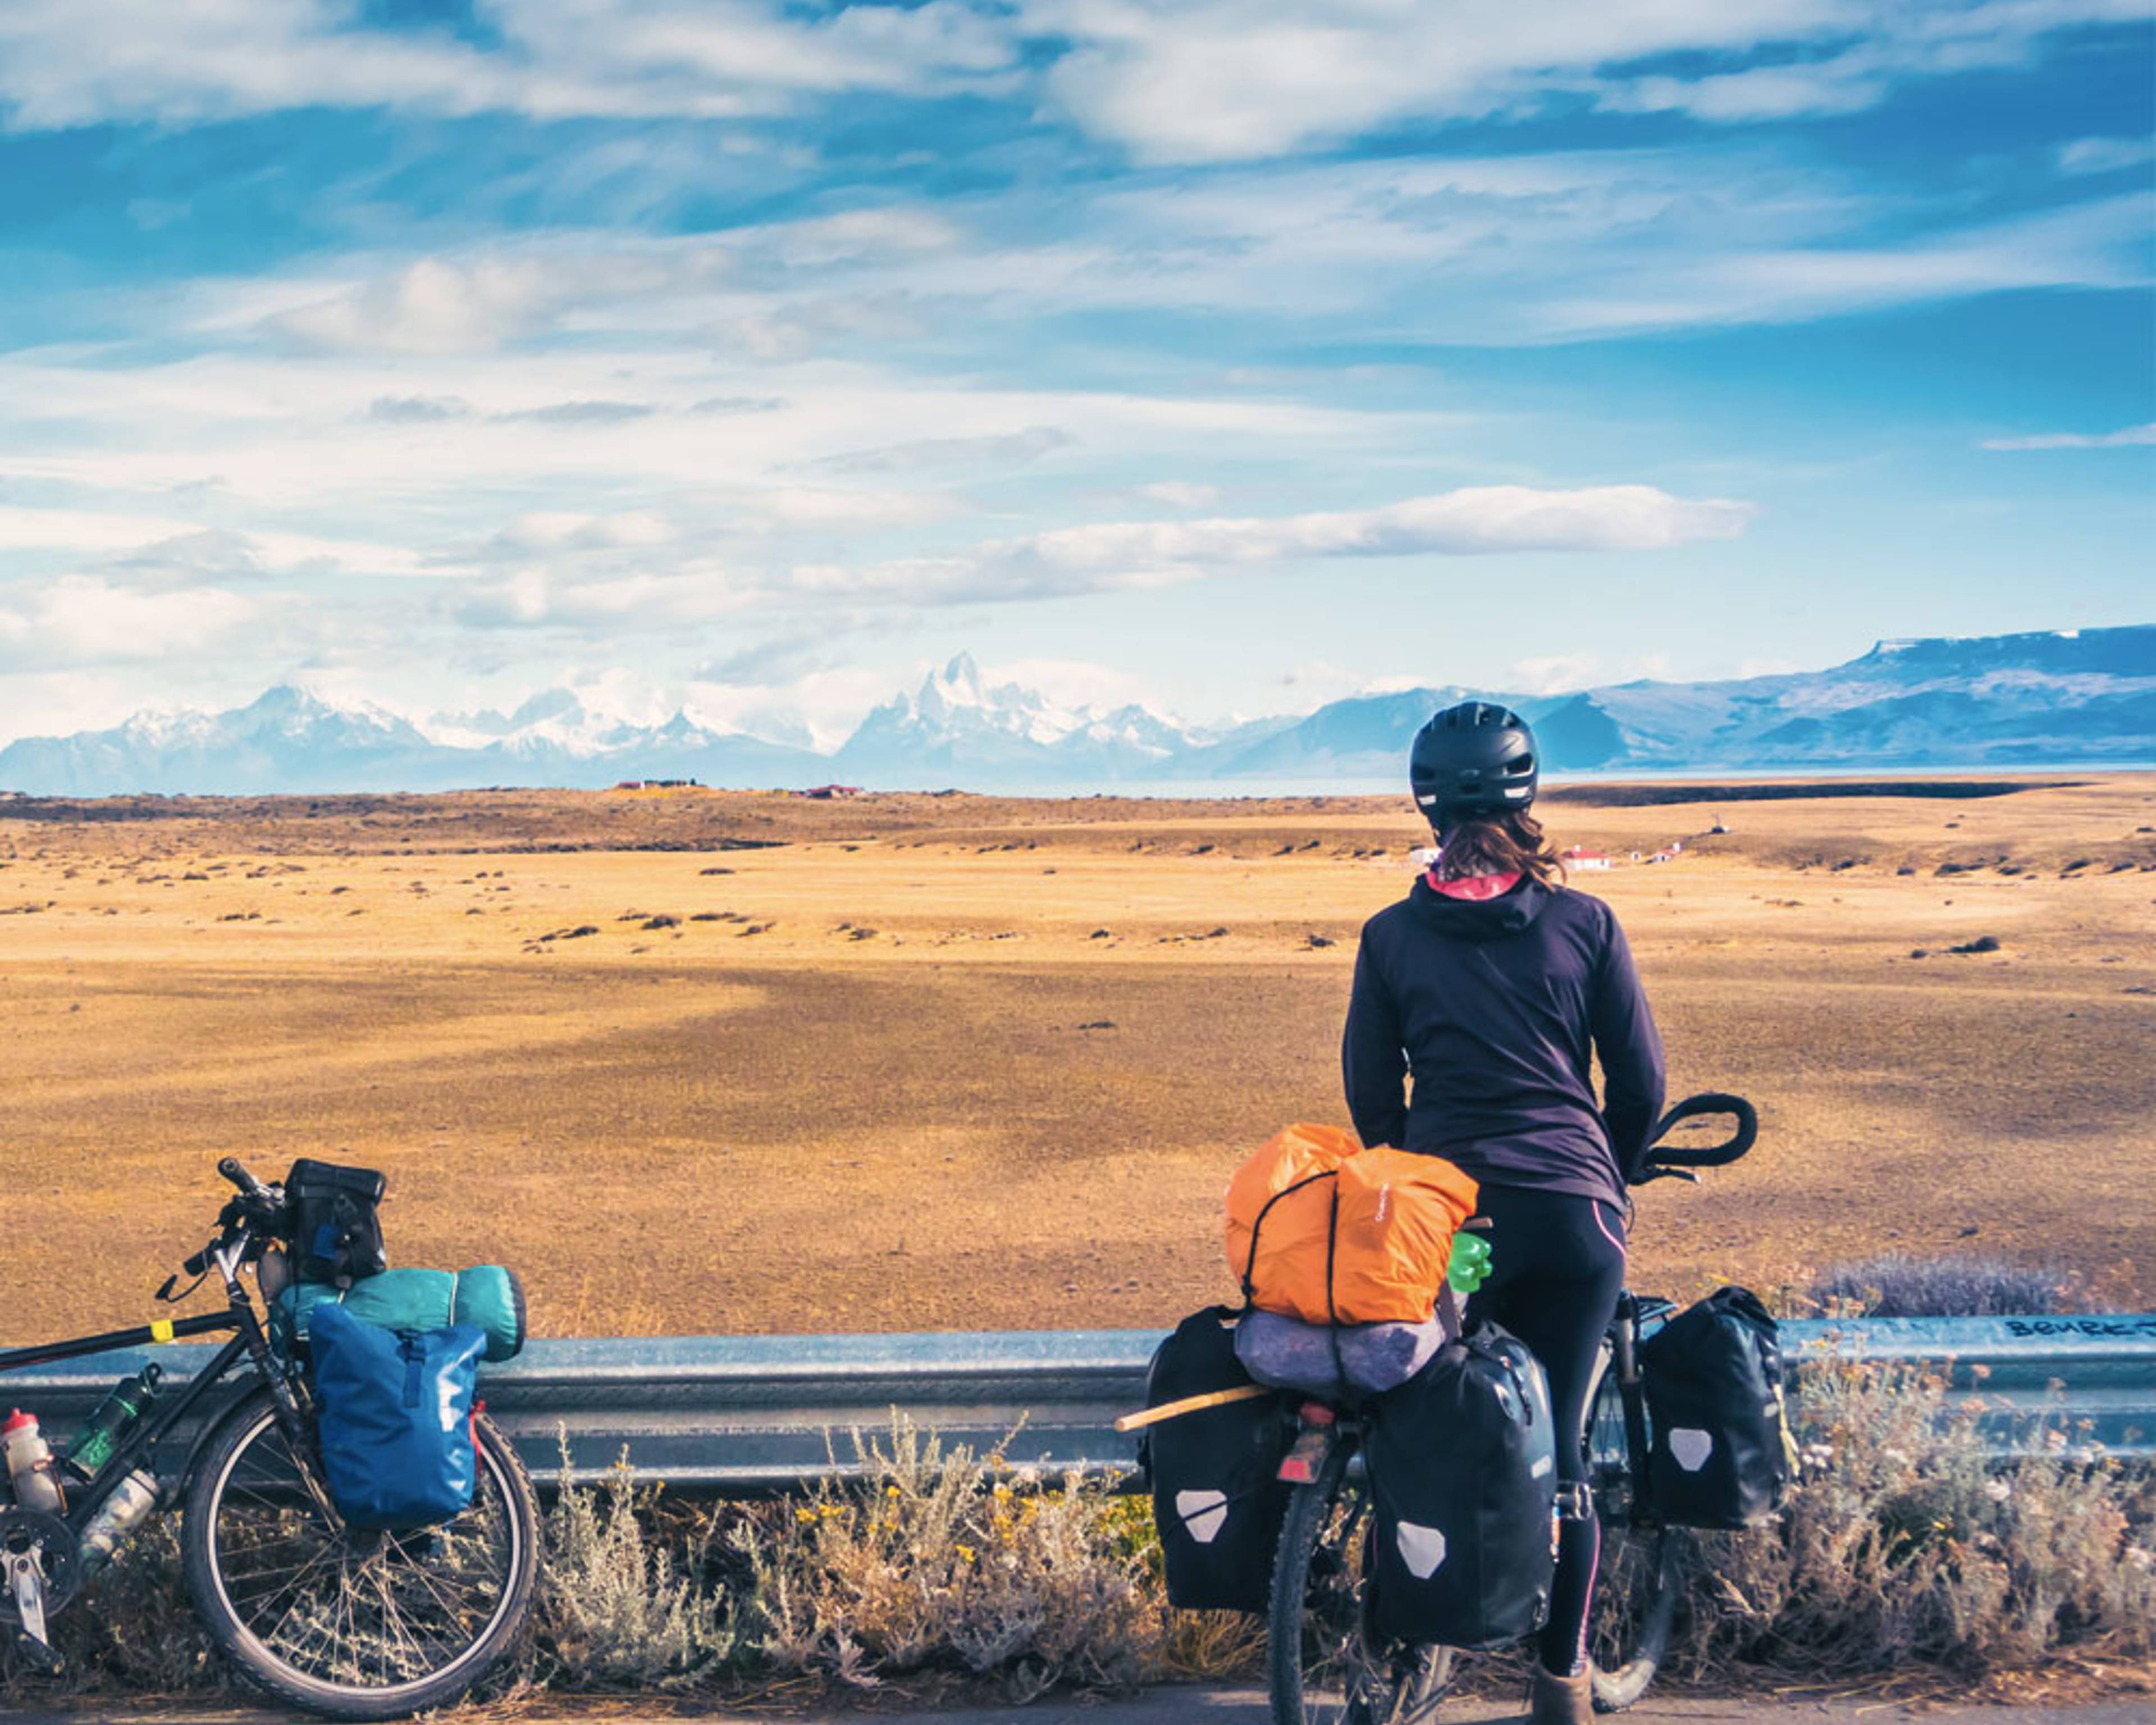 Design your perfect cycling trip with a local expert in Argentina